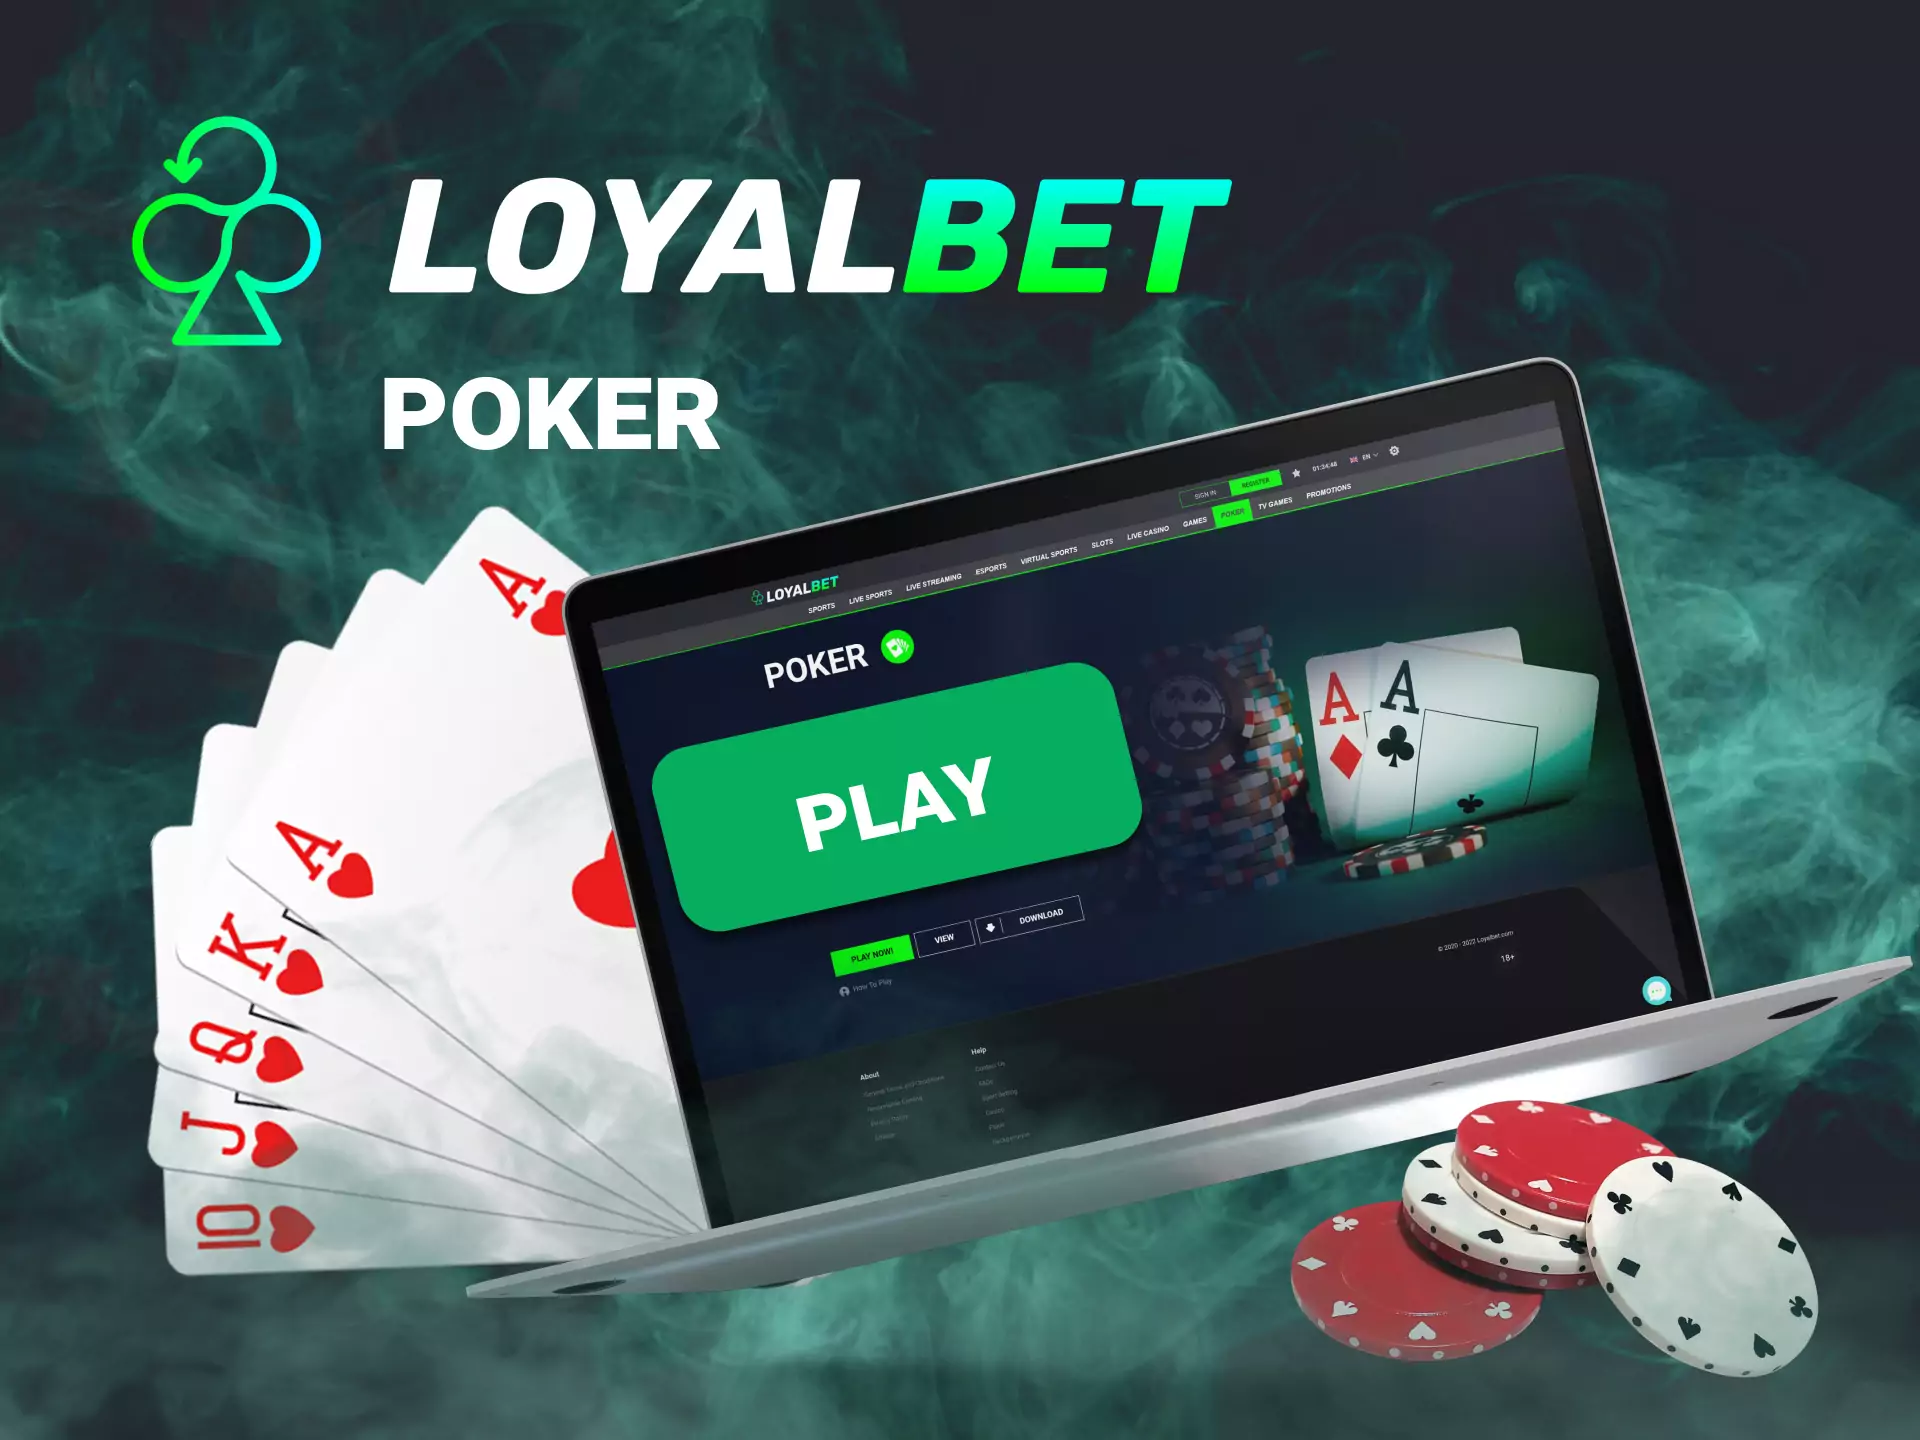 In the Loyalbet Live Casino, you can play poker with live users.